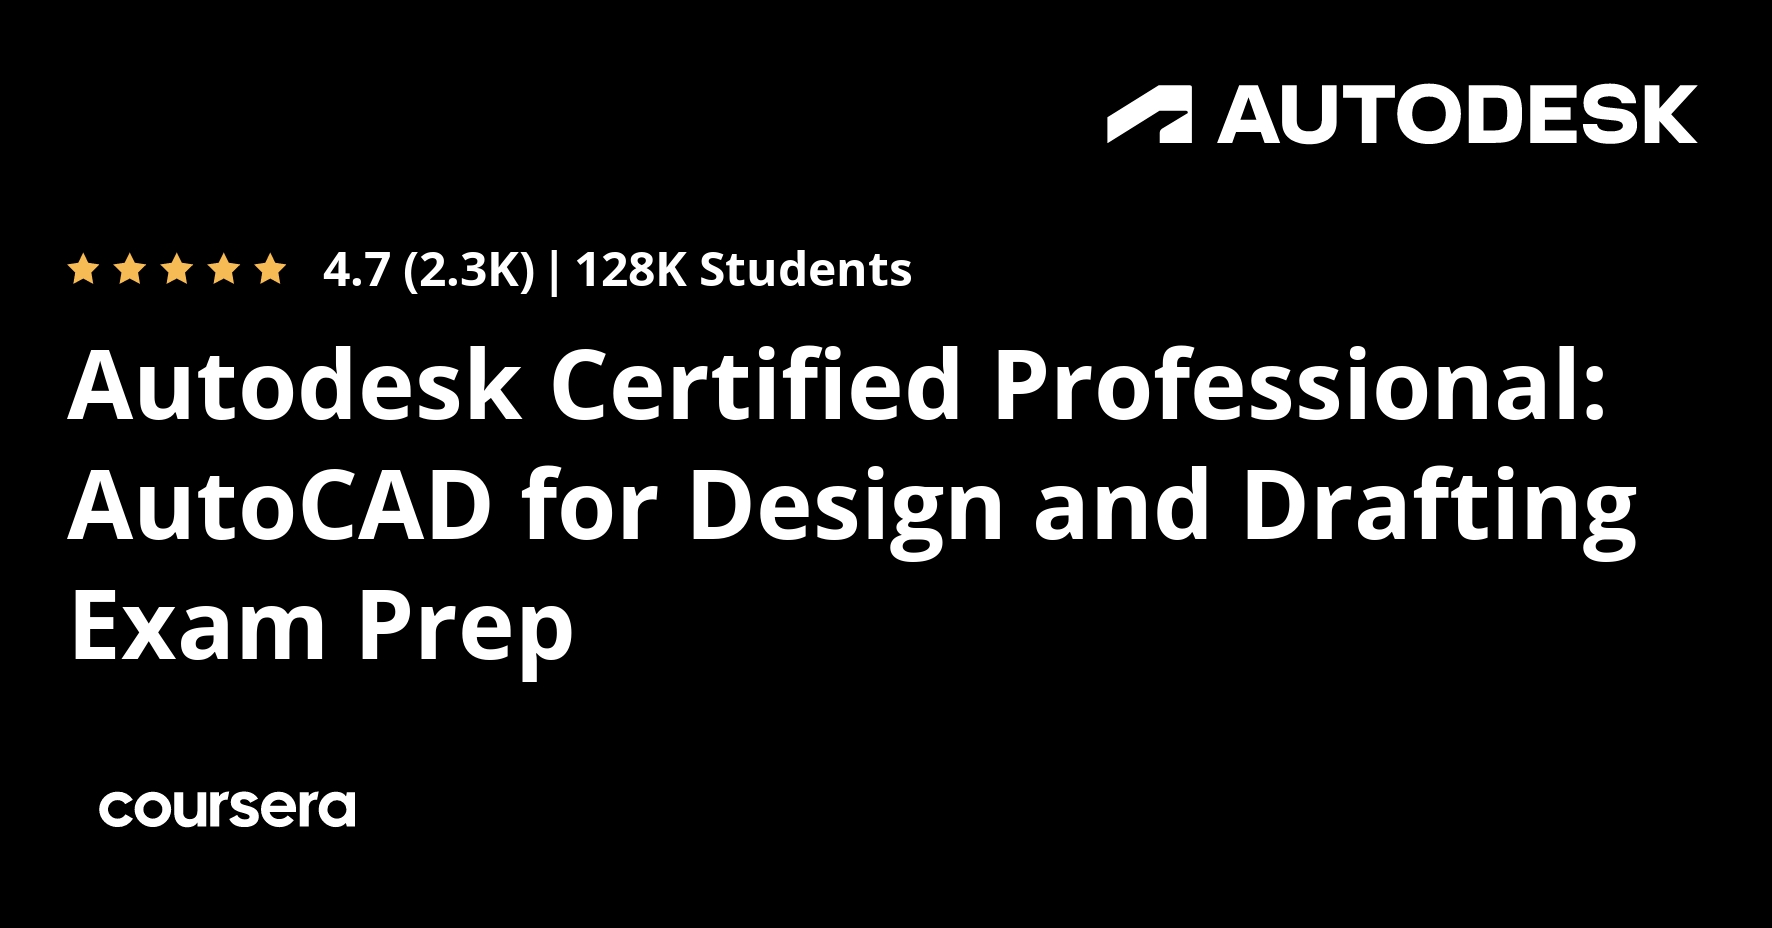 Autodesk Certified Professional: AutoCAD for Design and Drafting Exam